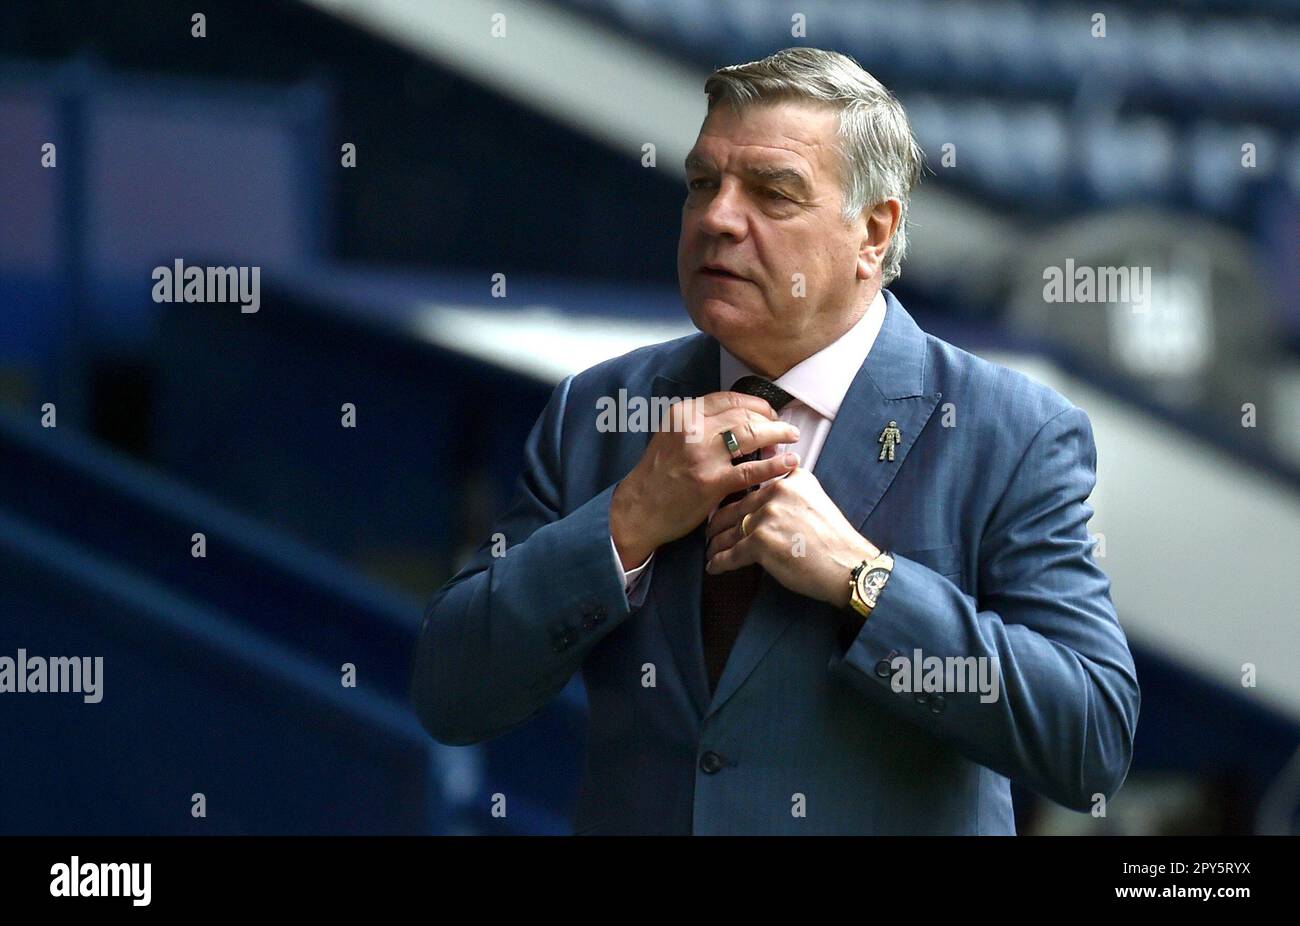 File photo dated 16-05-2021 of Sam Allardyce. Leeds are expected to appoint Sam Allardyce on Wednesday as they bid to avoid relegation from the Premier League. The club will part company with manager Javi Gracia – having already removed director of football Victor Orta – with Allardyce taking over for the run-in. Issue date: Thursday May 4, 2023. Stock Photo